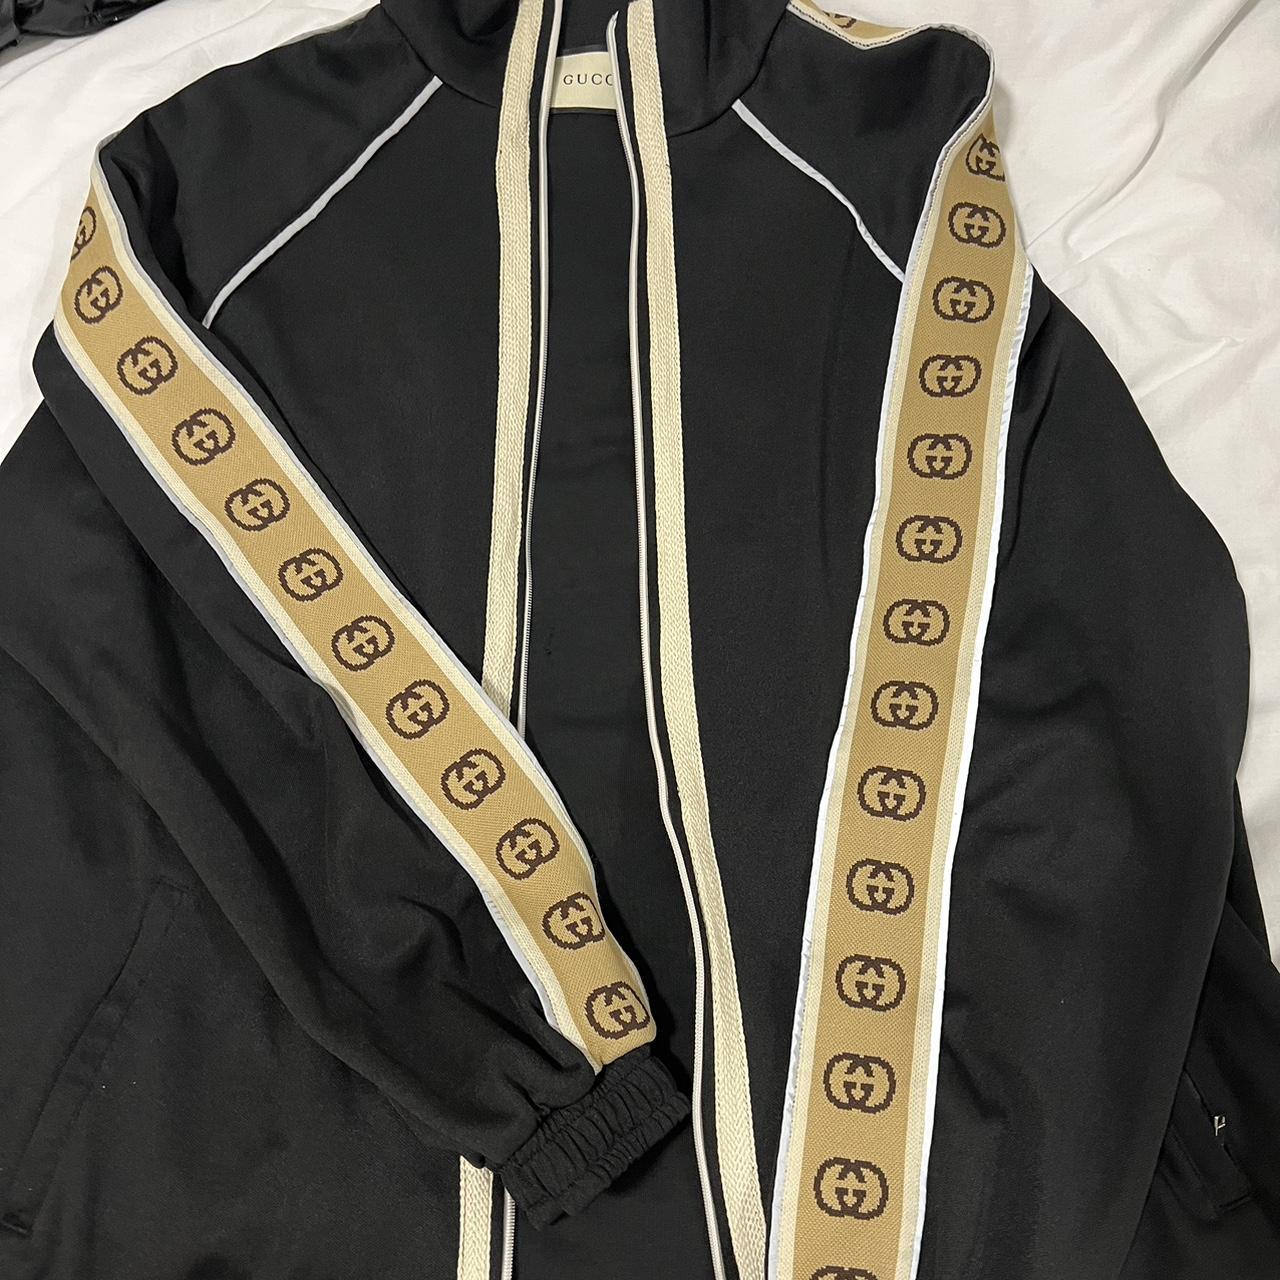 Gucci track jacket images - do not purchase for £1.00 - Depop